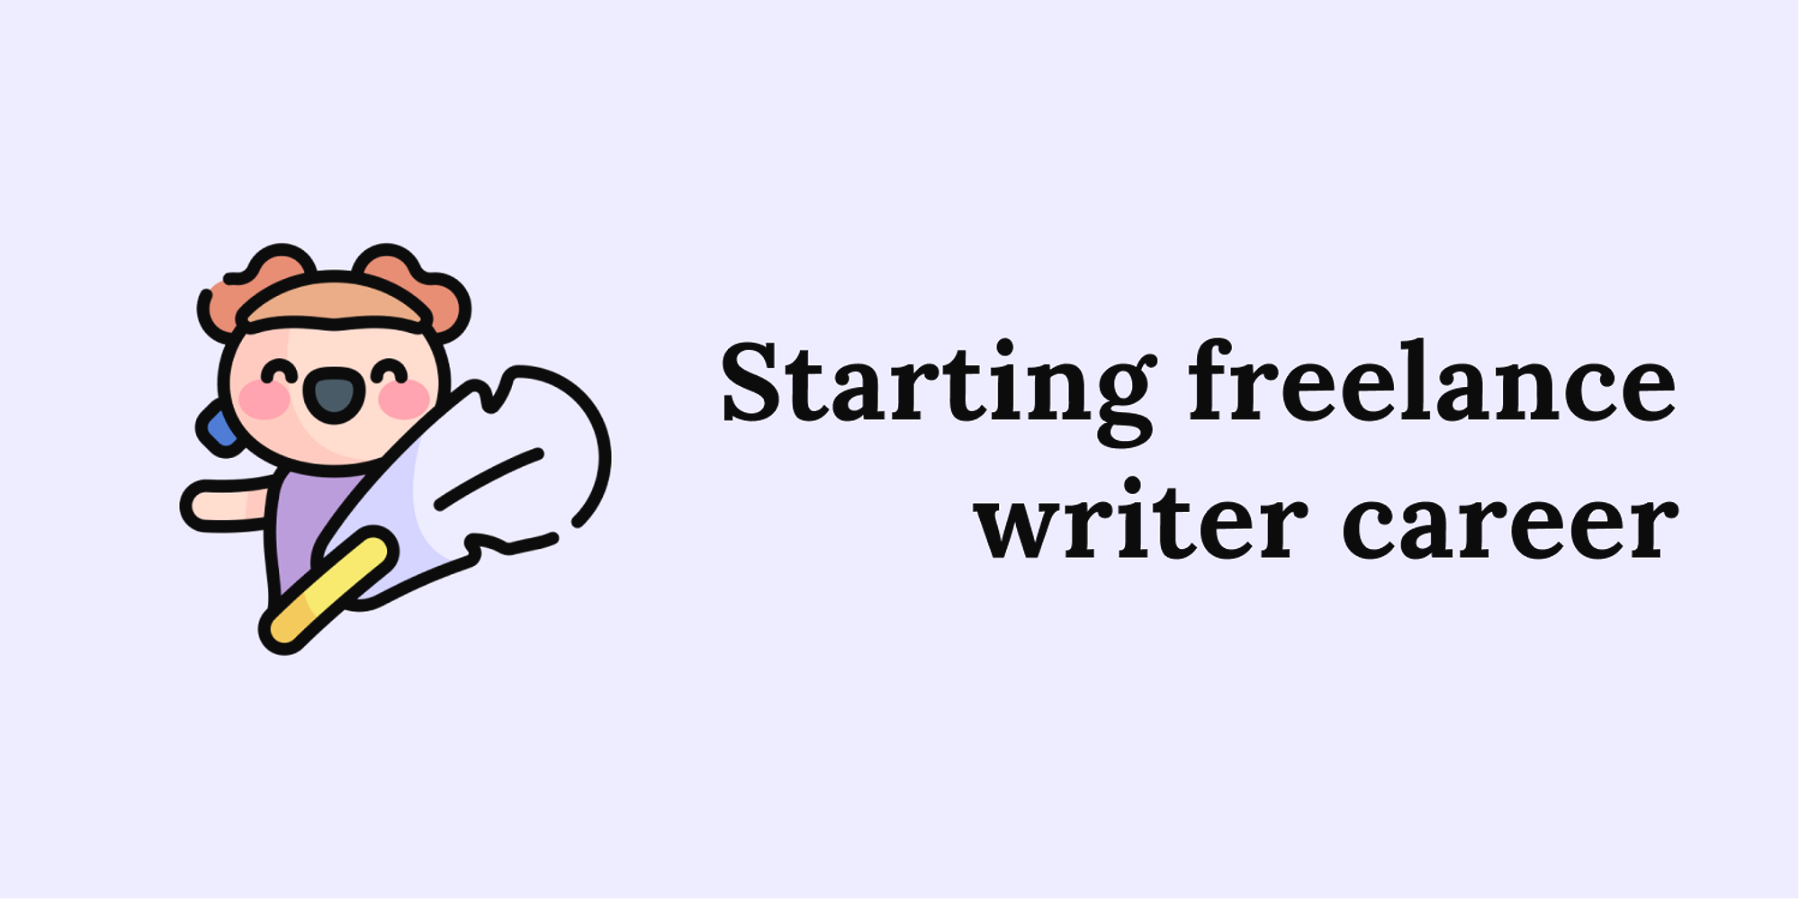 How to start a career as a freelance writer